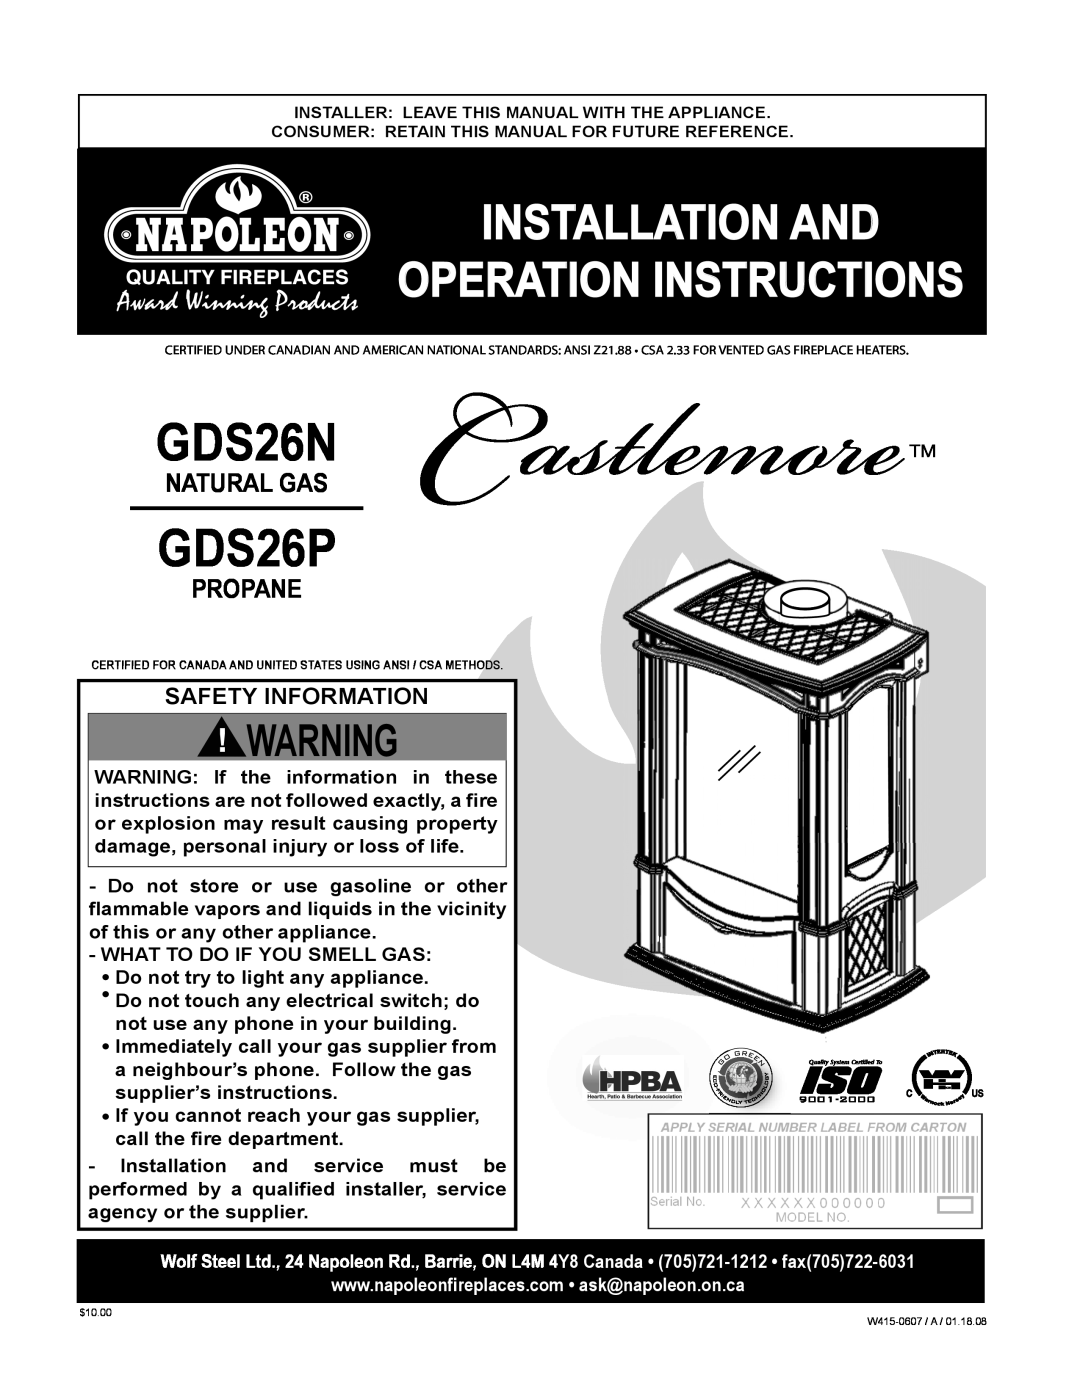 Napoleon Fireplaces GDS26N manual GDS26P, Installation And Operation Instructions, Natural Gas, Propane 